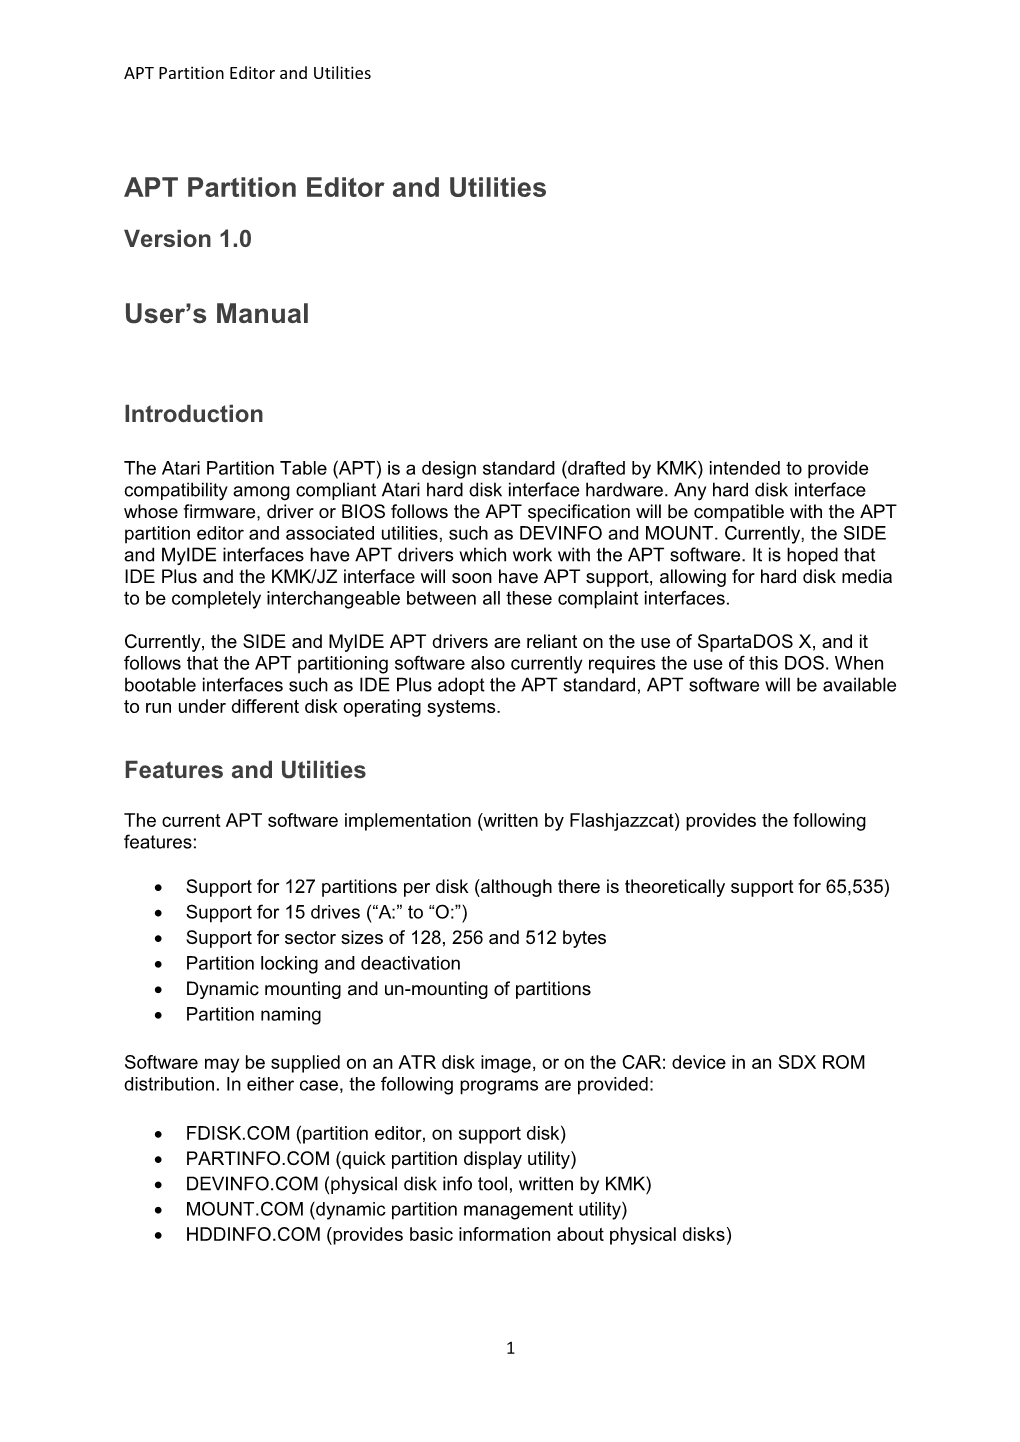 APT Partition Editor and Utilities User's Manual